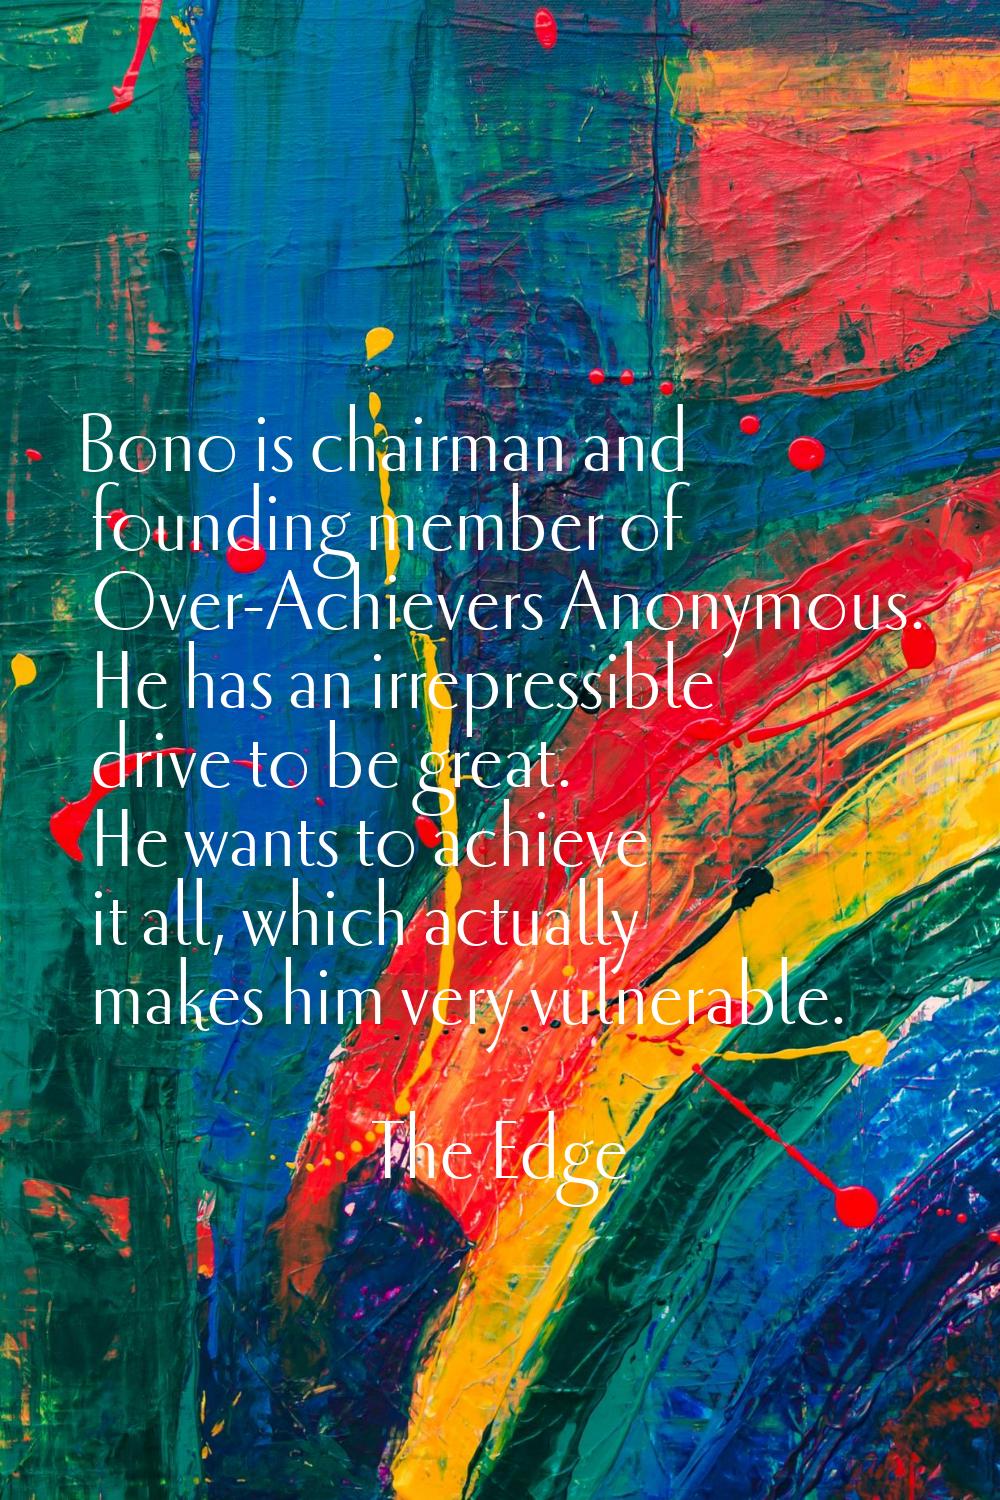 Bono is chairman and founding member of Over-Achievers Anonymous. He has an irrepressible drive to 